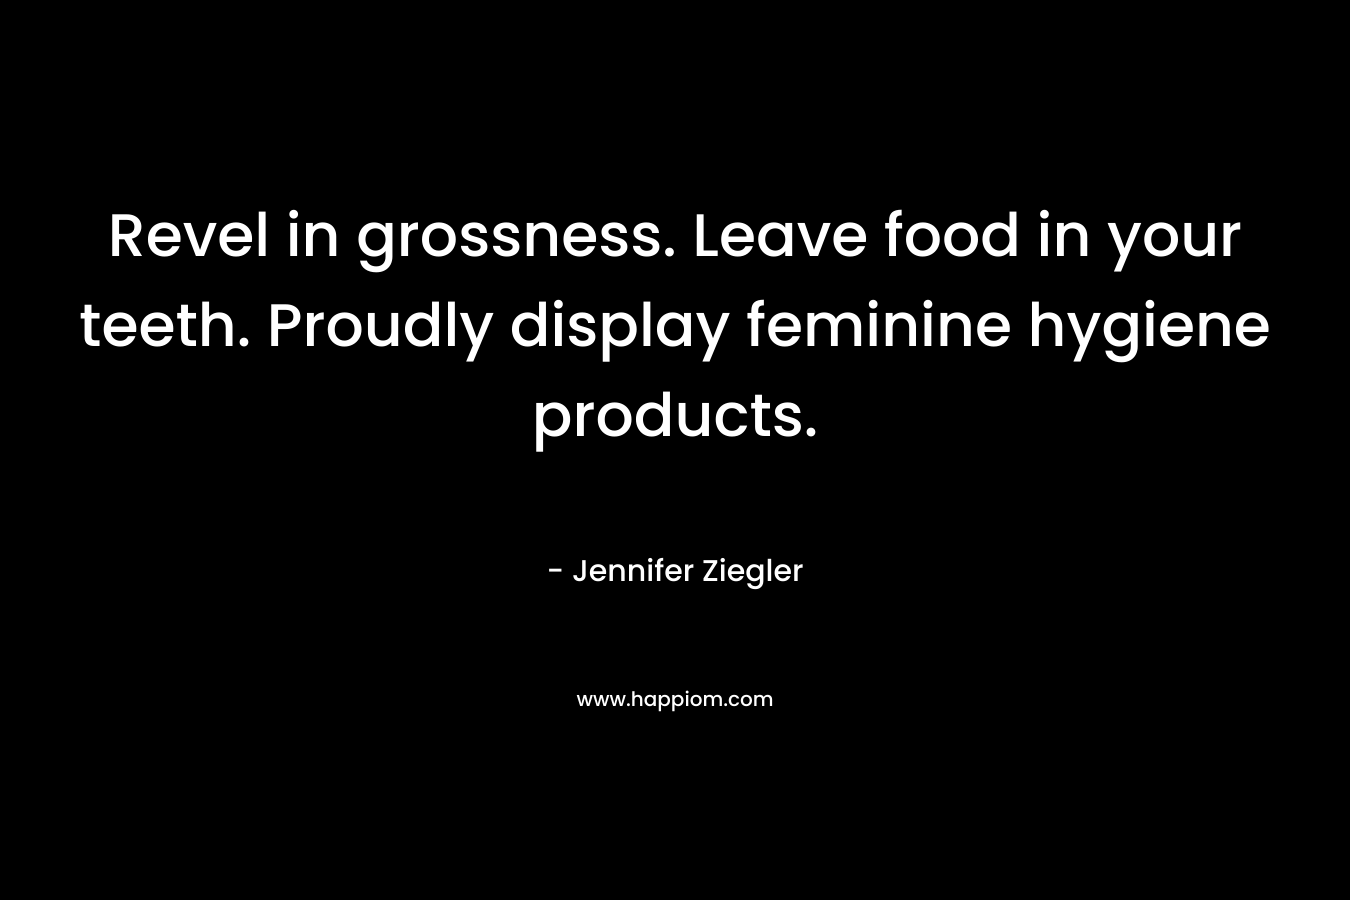 Revel in grossness. Leave food in your teeth. Proudly display feminine hygiene products. – Jennifer Ziegler